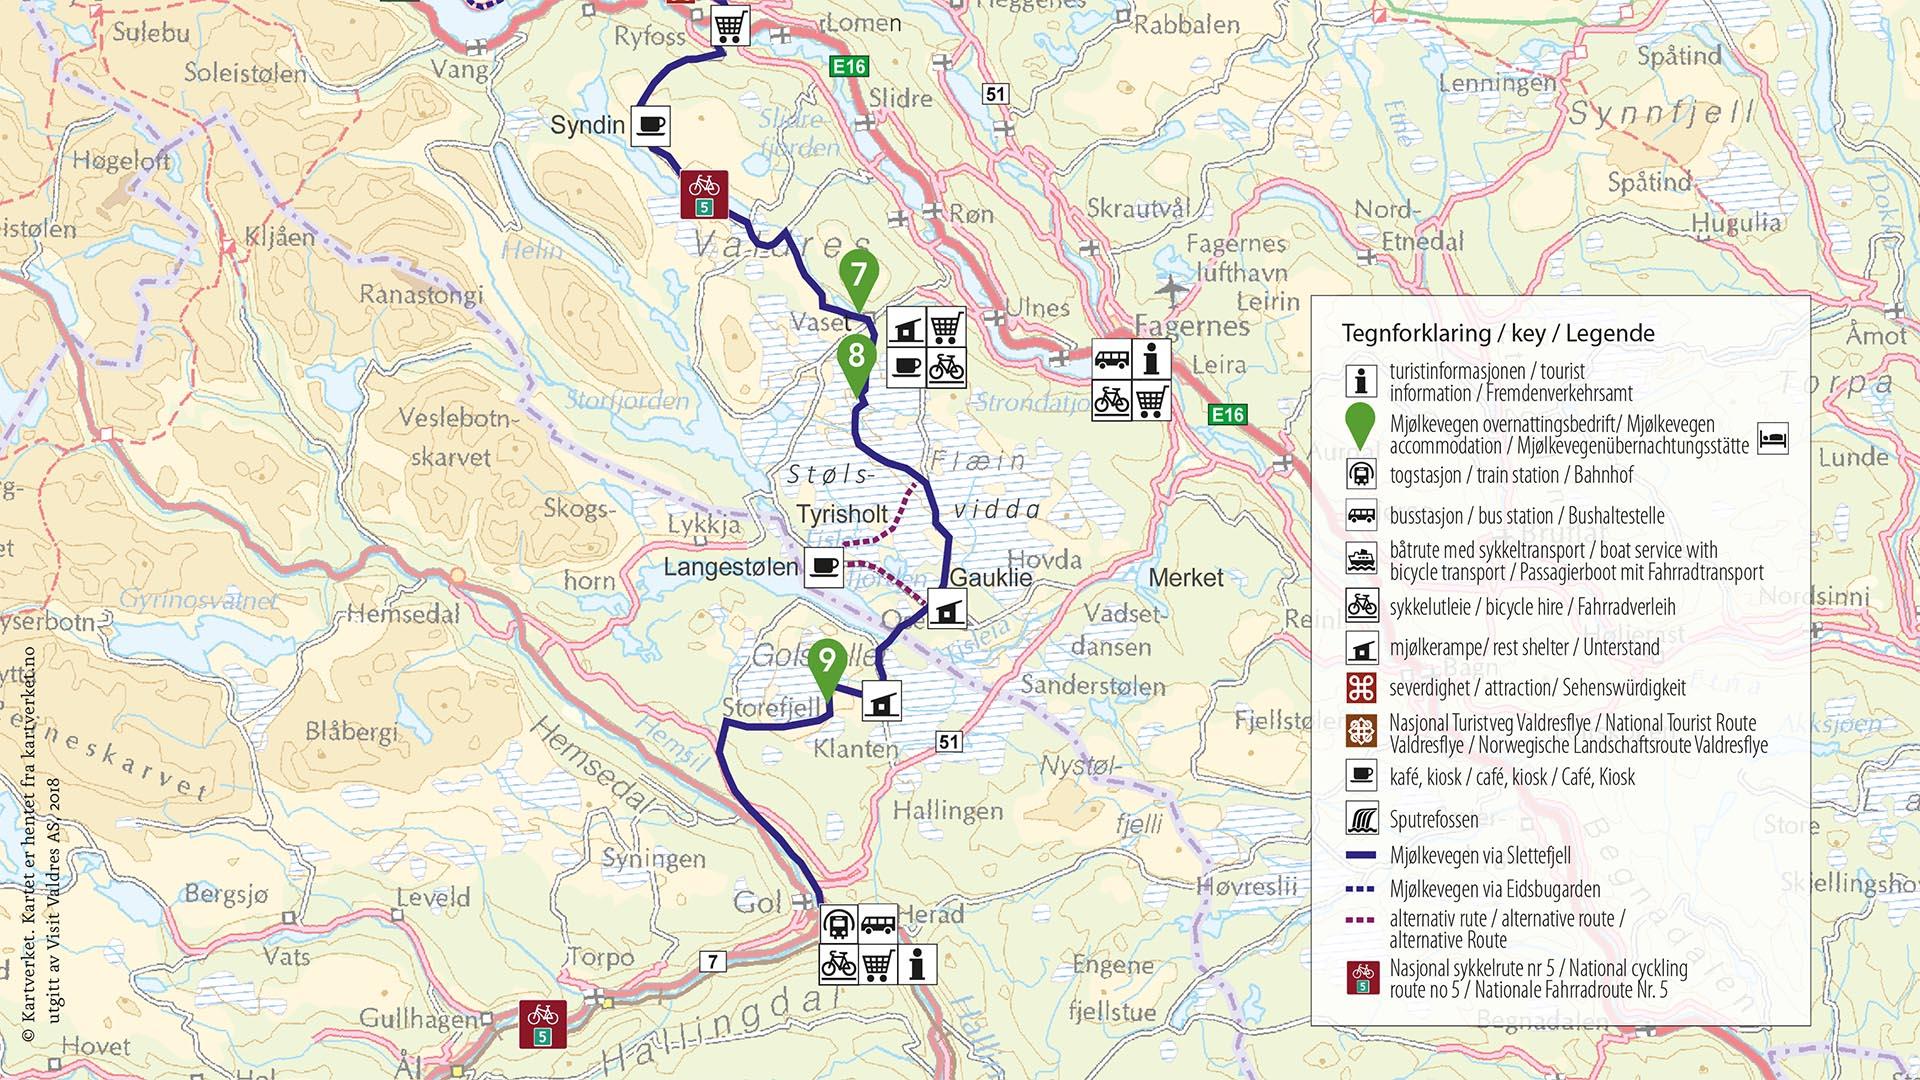 Image of a map that shows the southern part of the cycling route Mjølkevegen.